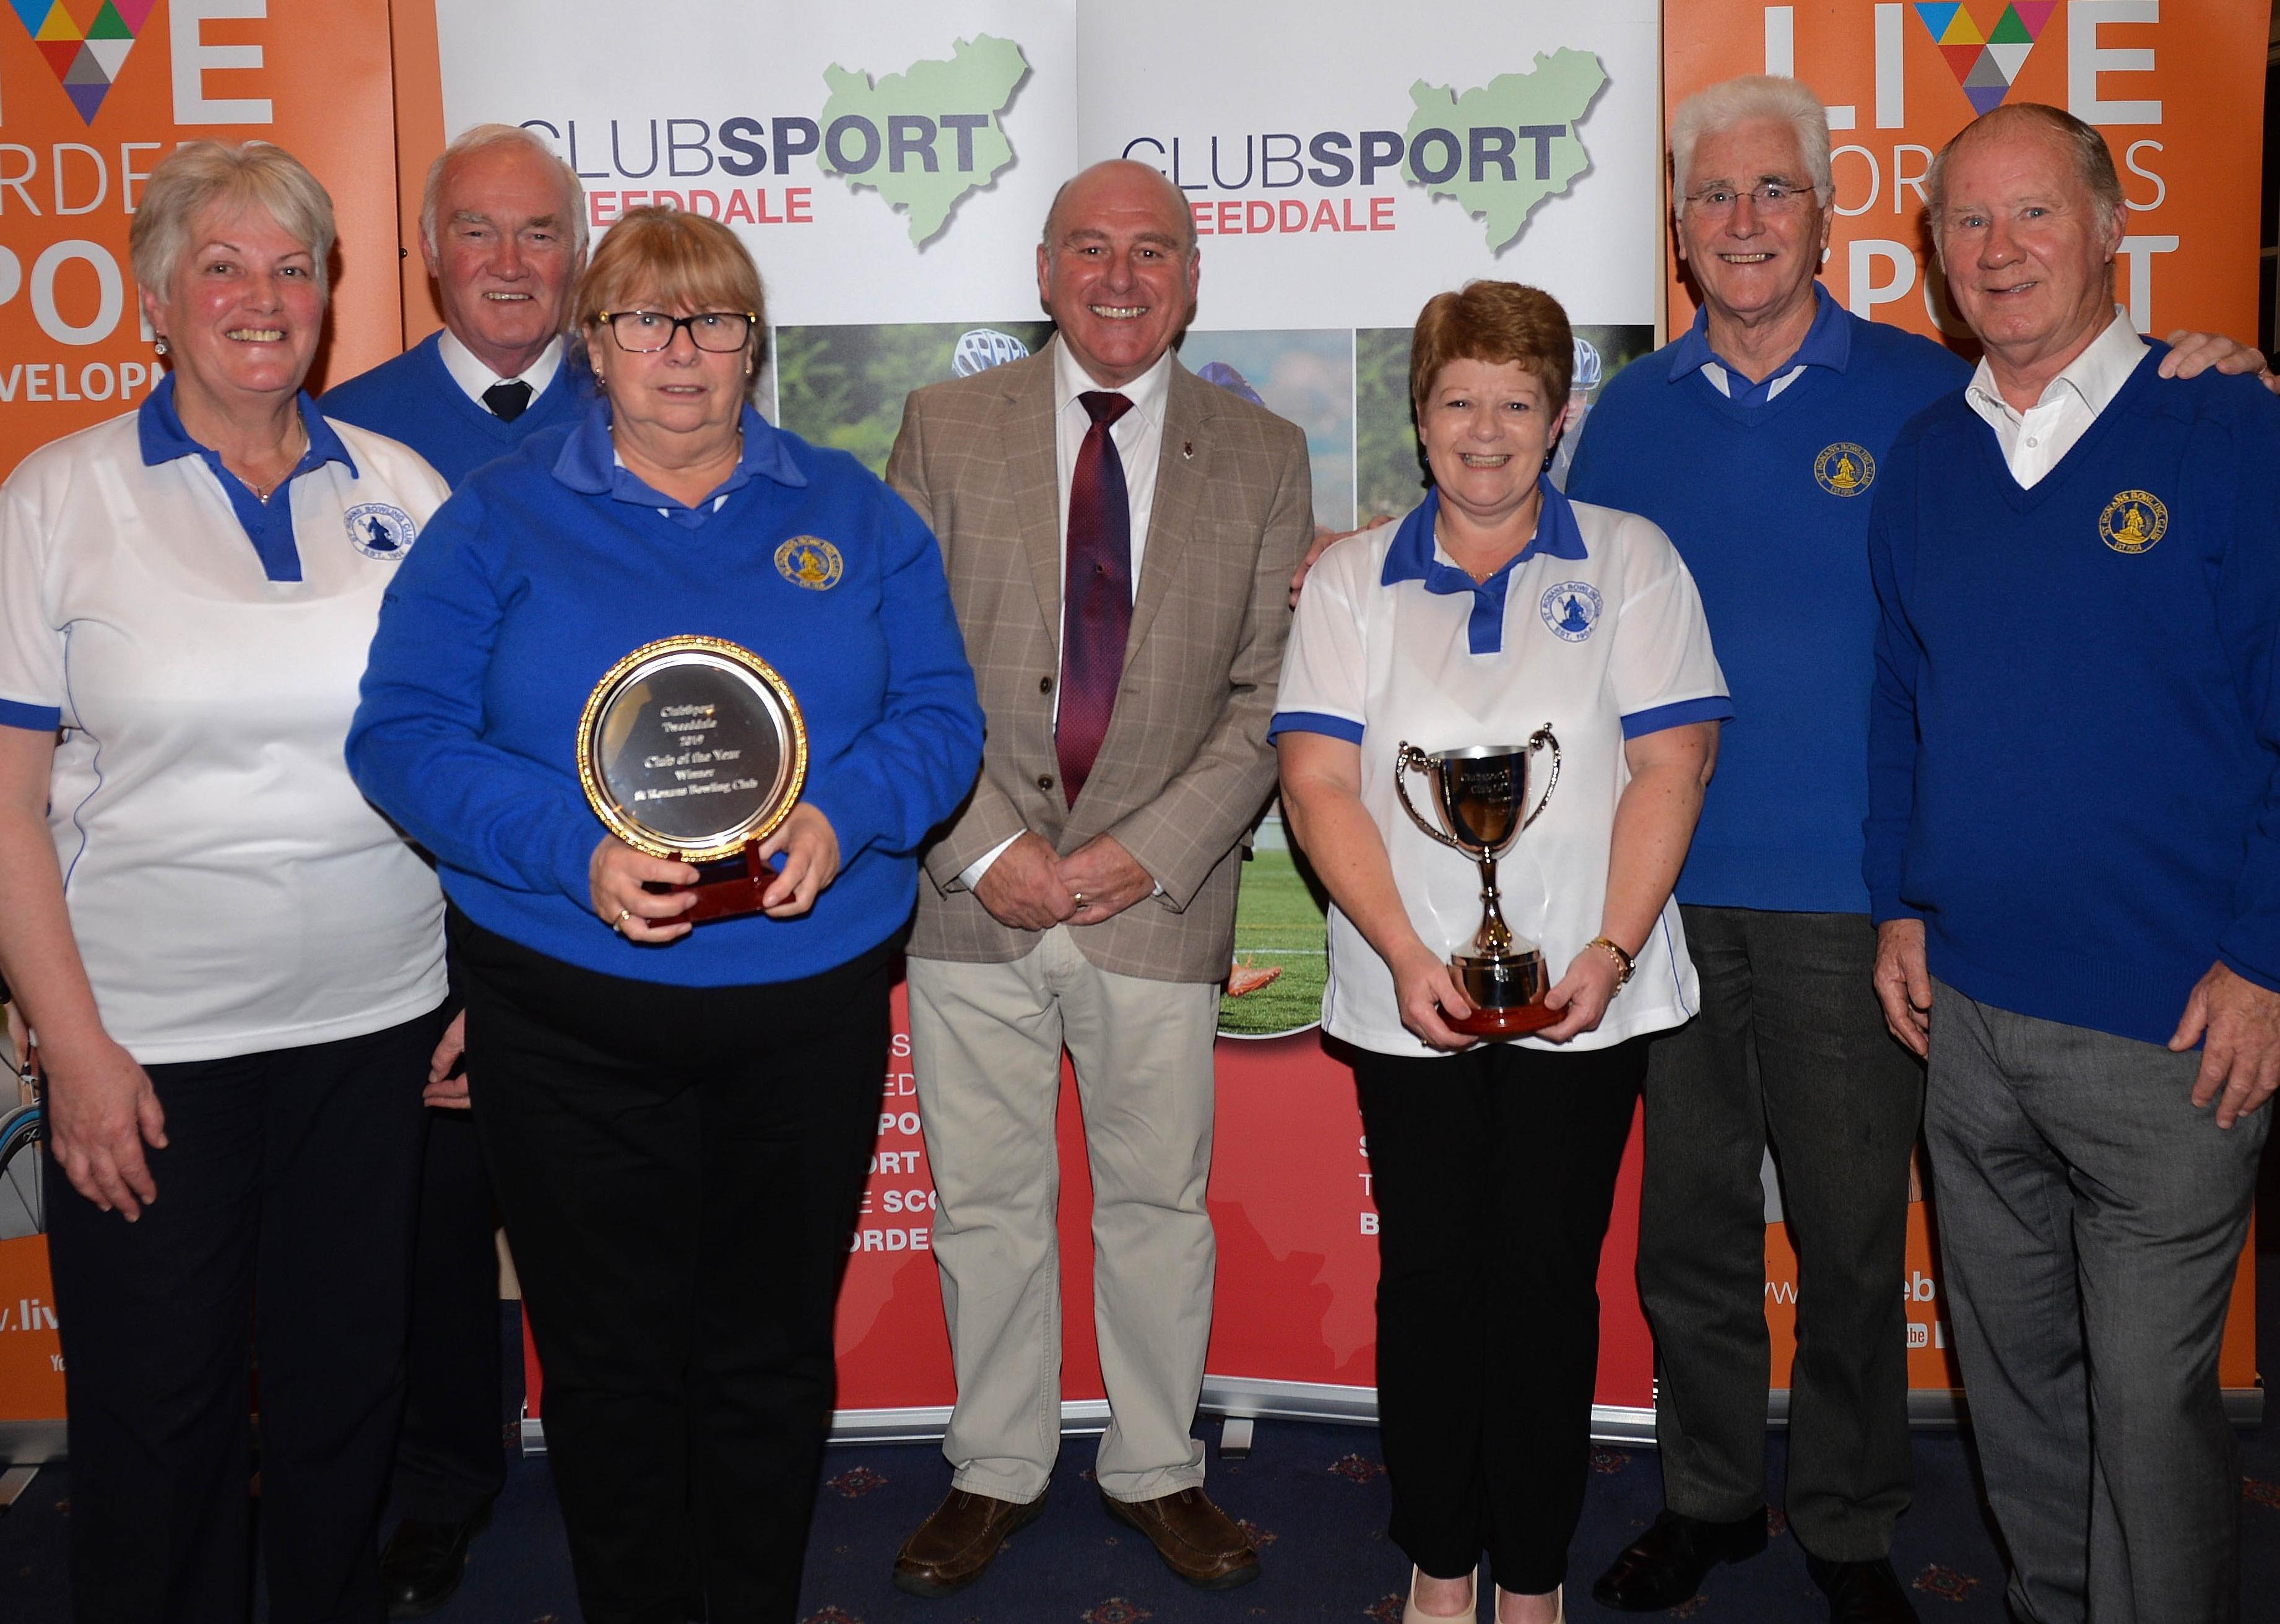 Adrian Lucas presented members of the St Ronan's Bowling Club with the Club of the Year award.. Clubsport Tweeddale awards 2019 (picture: Alwyn Johnston)